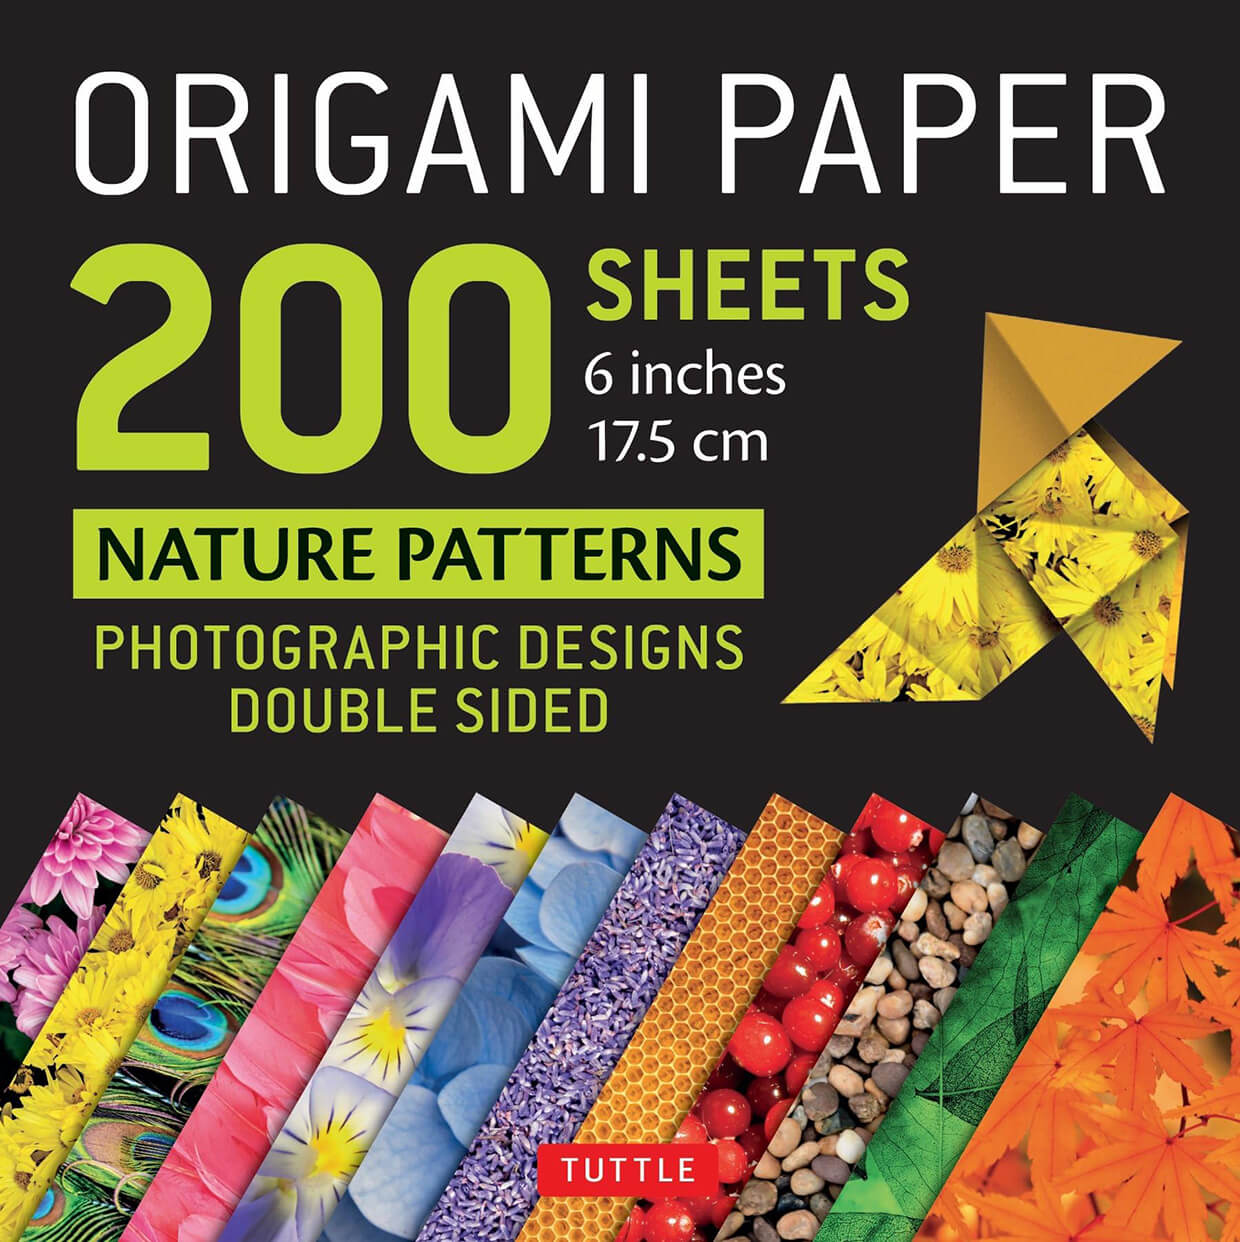 Nature patterns origami paper